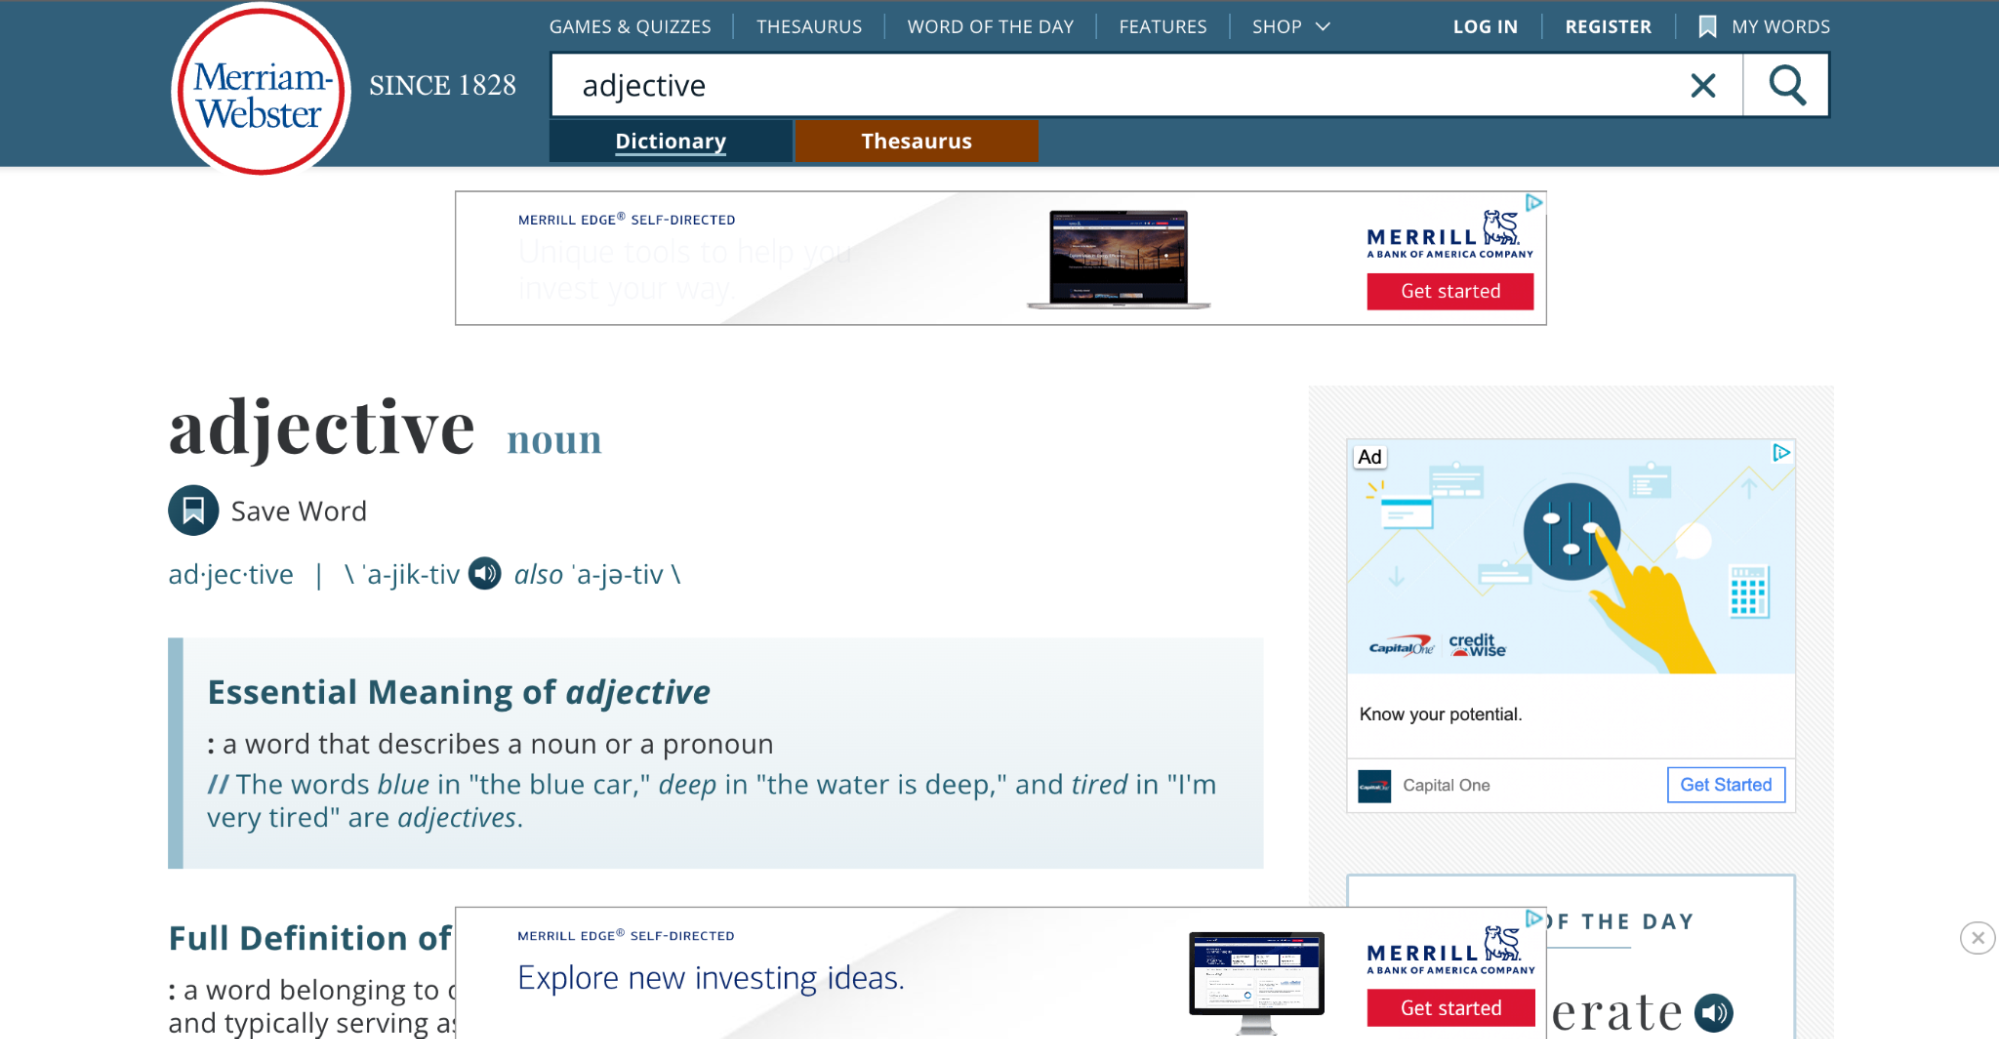 Merriam-Webster essential meaning of adjective